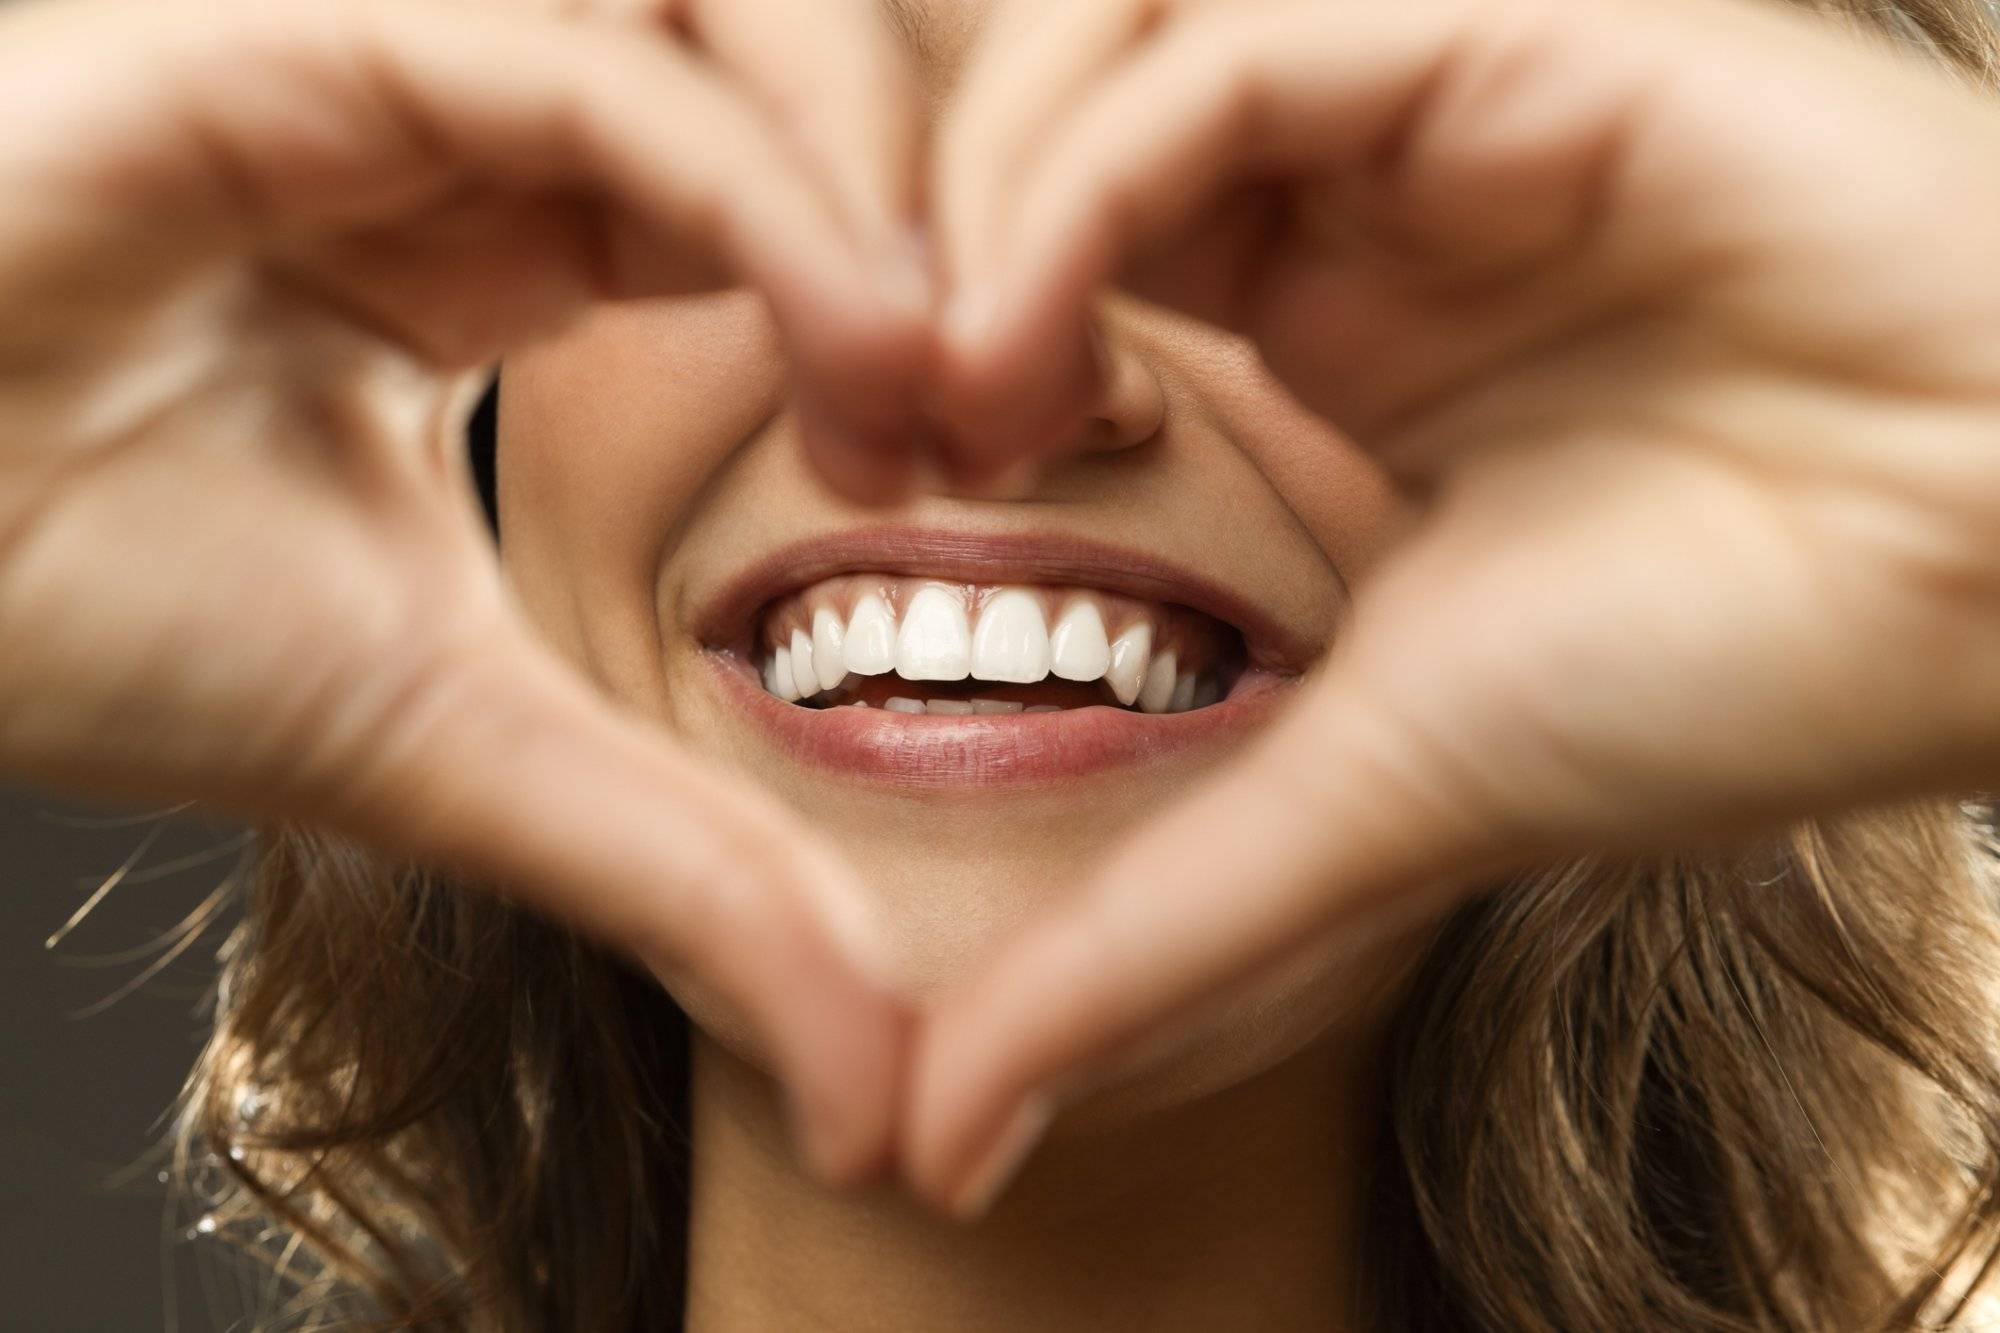 Smile Bright This Spring With Top Addison Family Dentistry Services